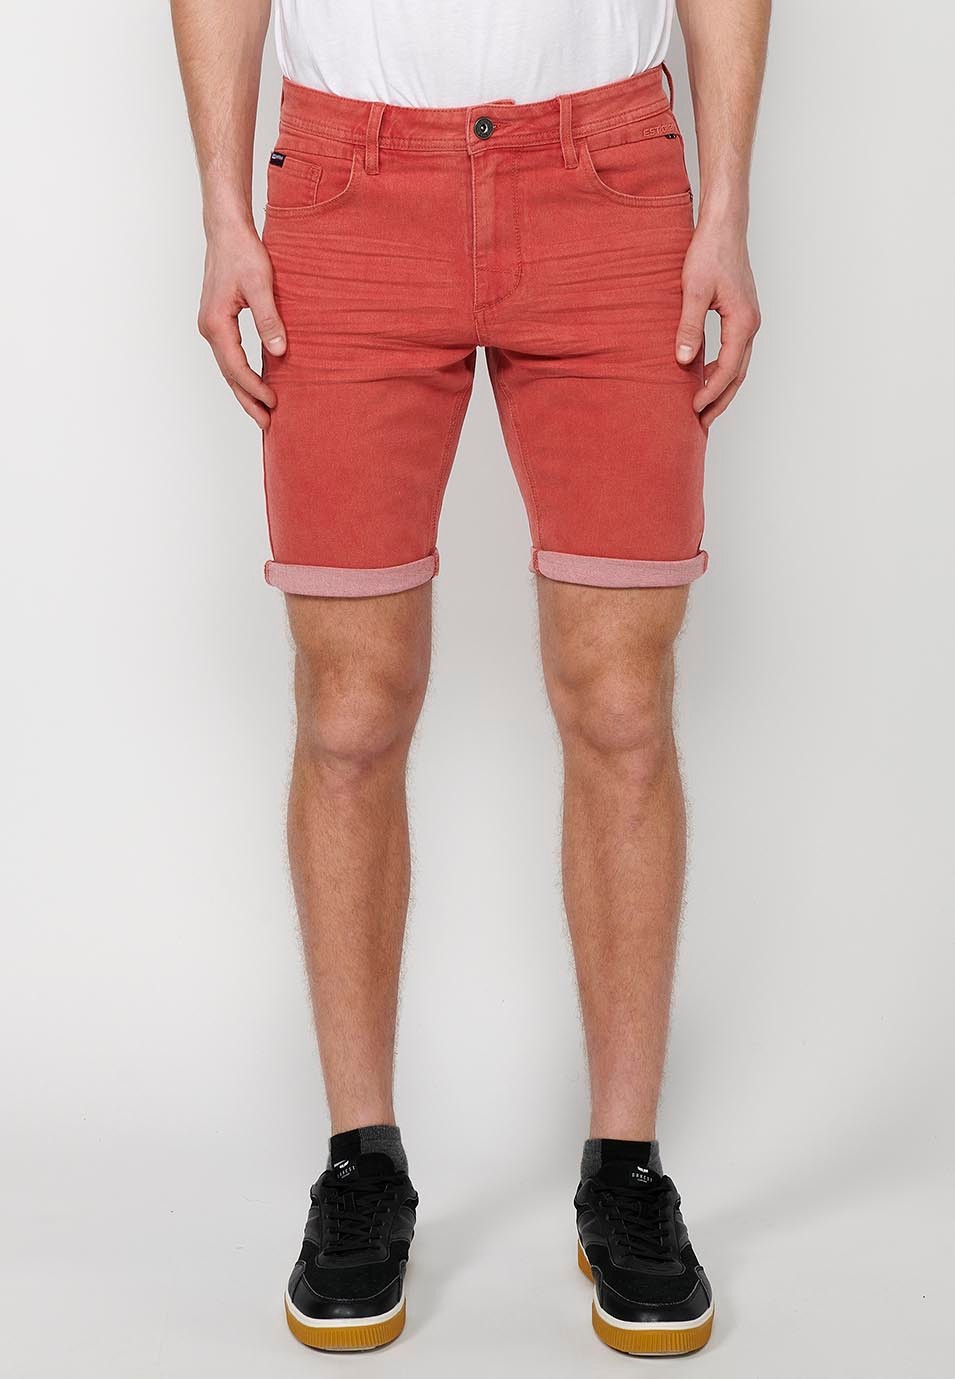 Shorts with a turn-up finish with front zipper and button closure and five pockets, one with a match pocket, in Red for Men 3